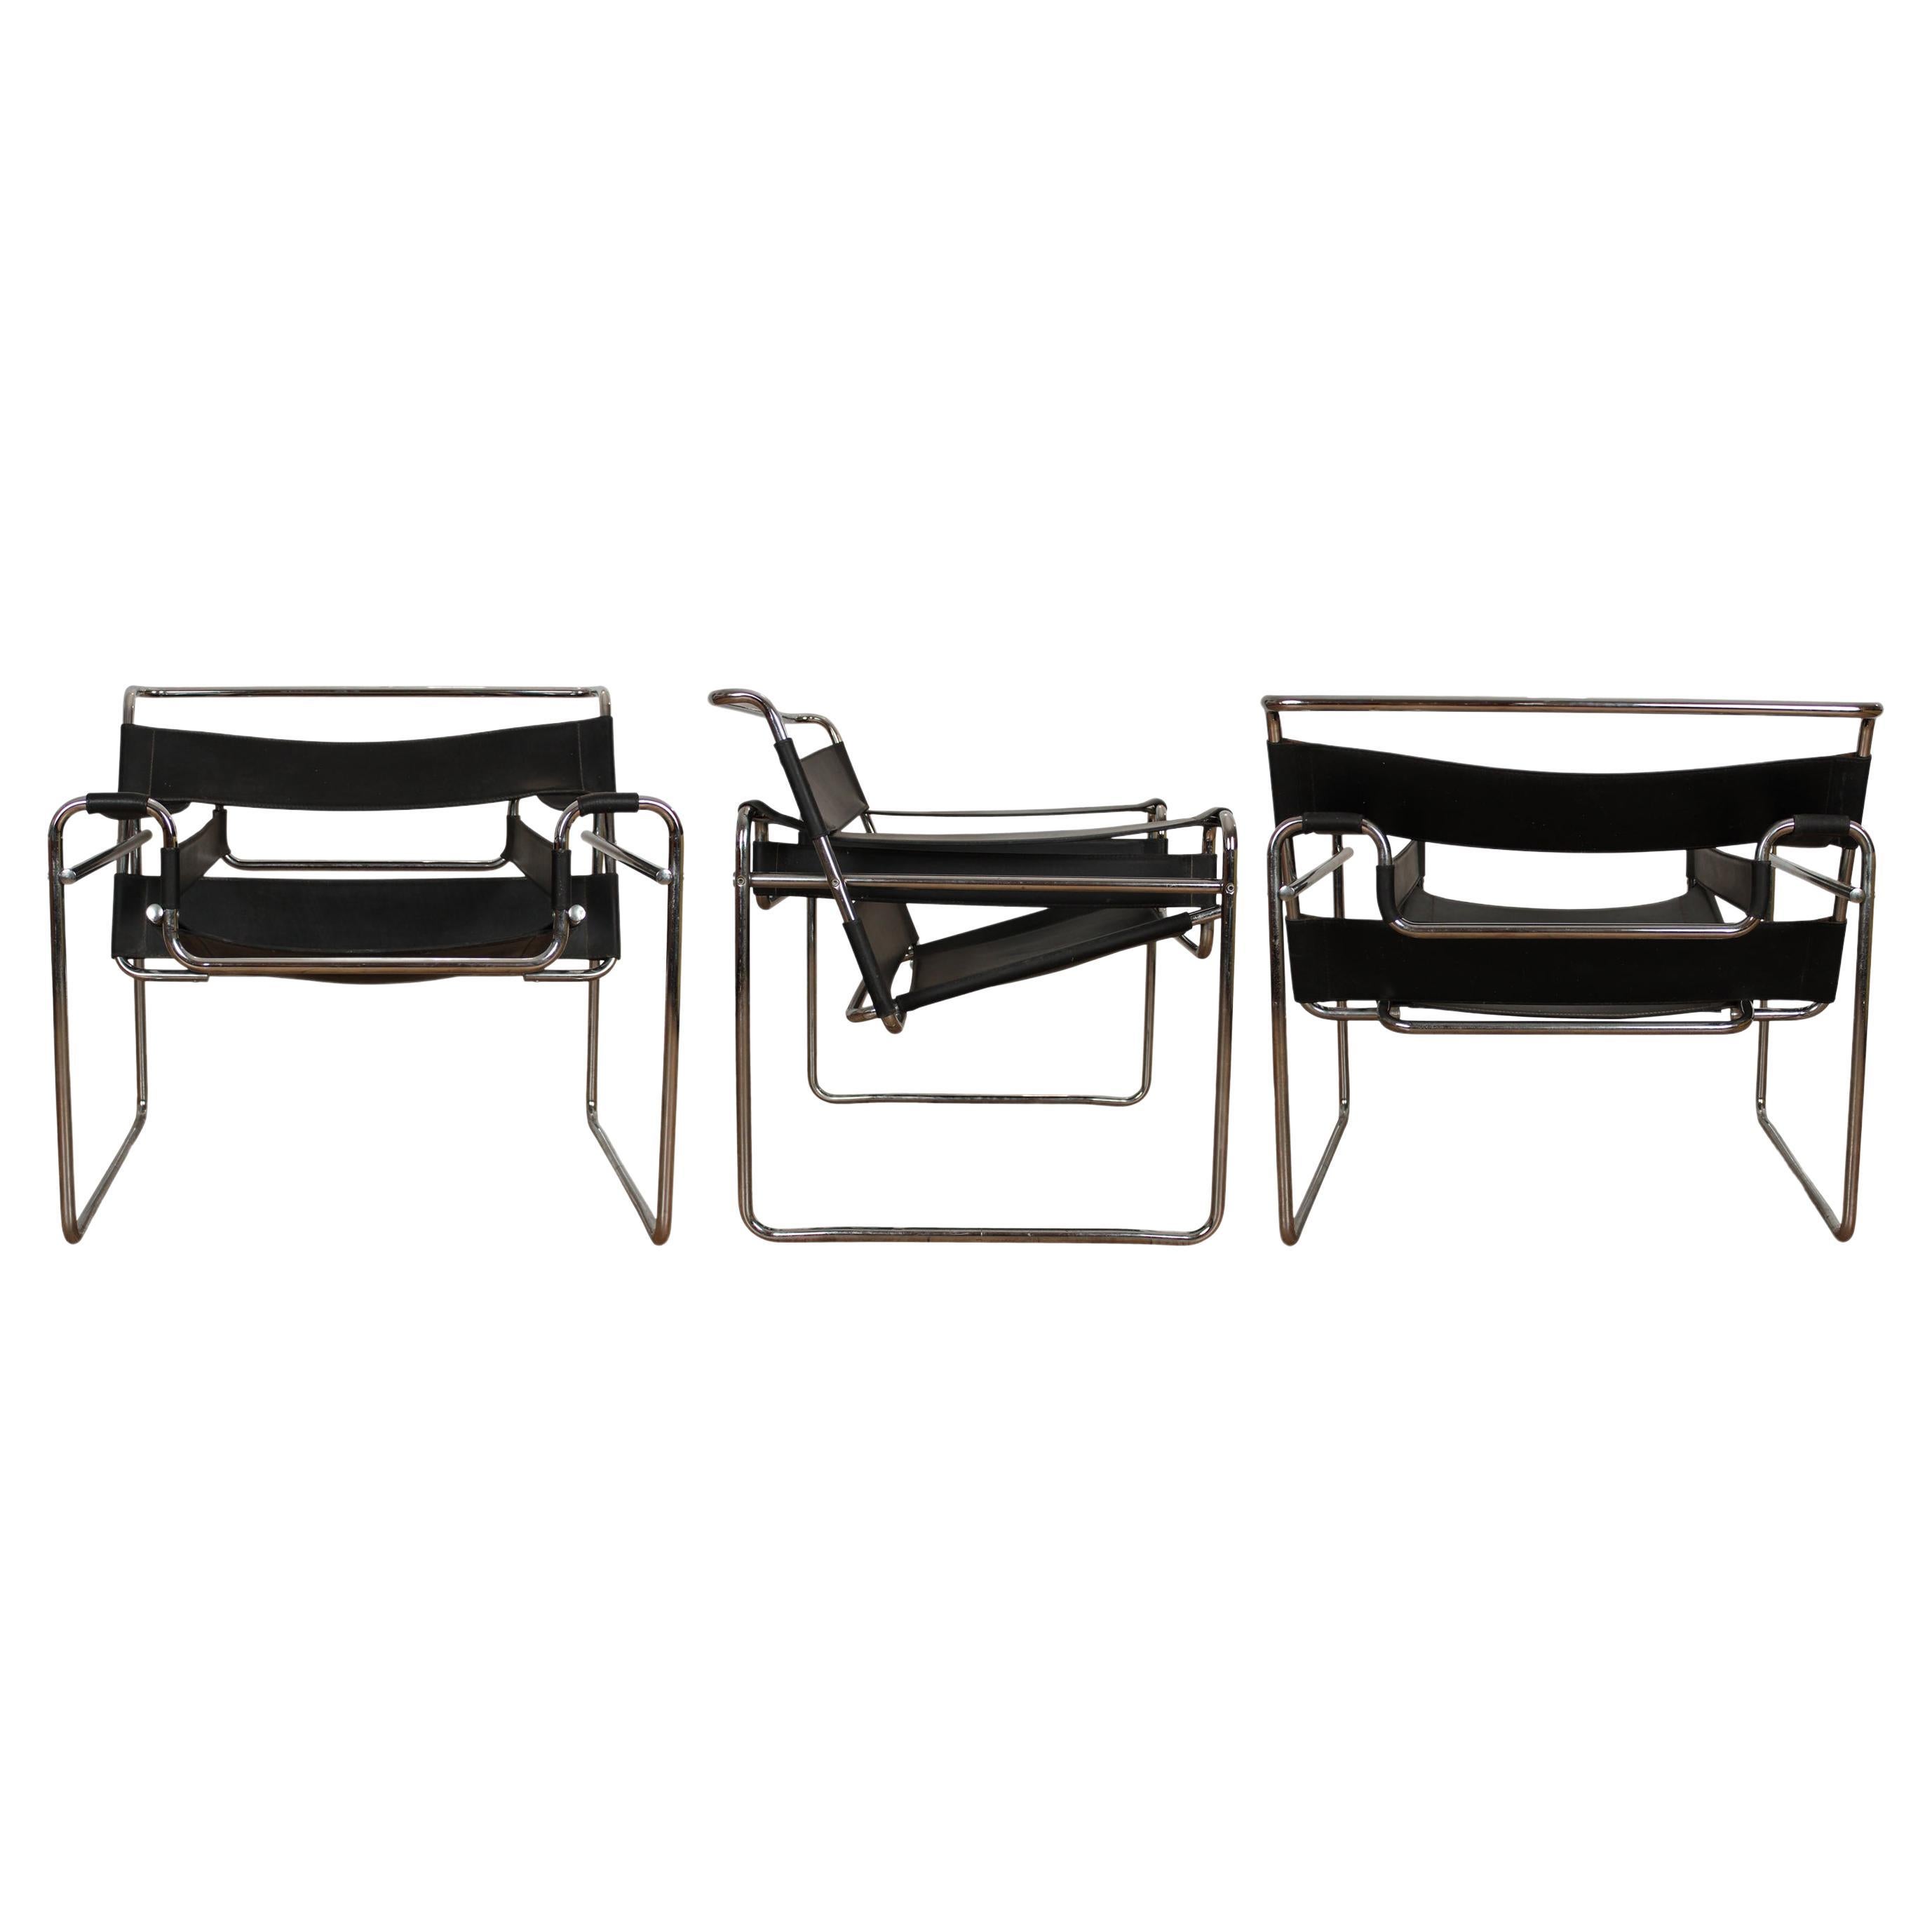 Set of three model B3 “Wassily” armchairs, designed by Marcel Breuer in 1925 and produced in Italy in 1973.

It features a chrome-plated steel structure and seat and back in black leather.

Good vintage condition.

When Breuer bought his first cycle